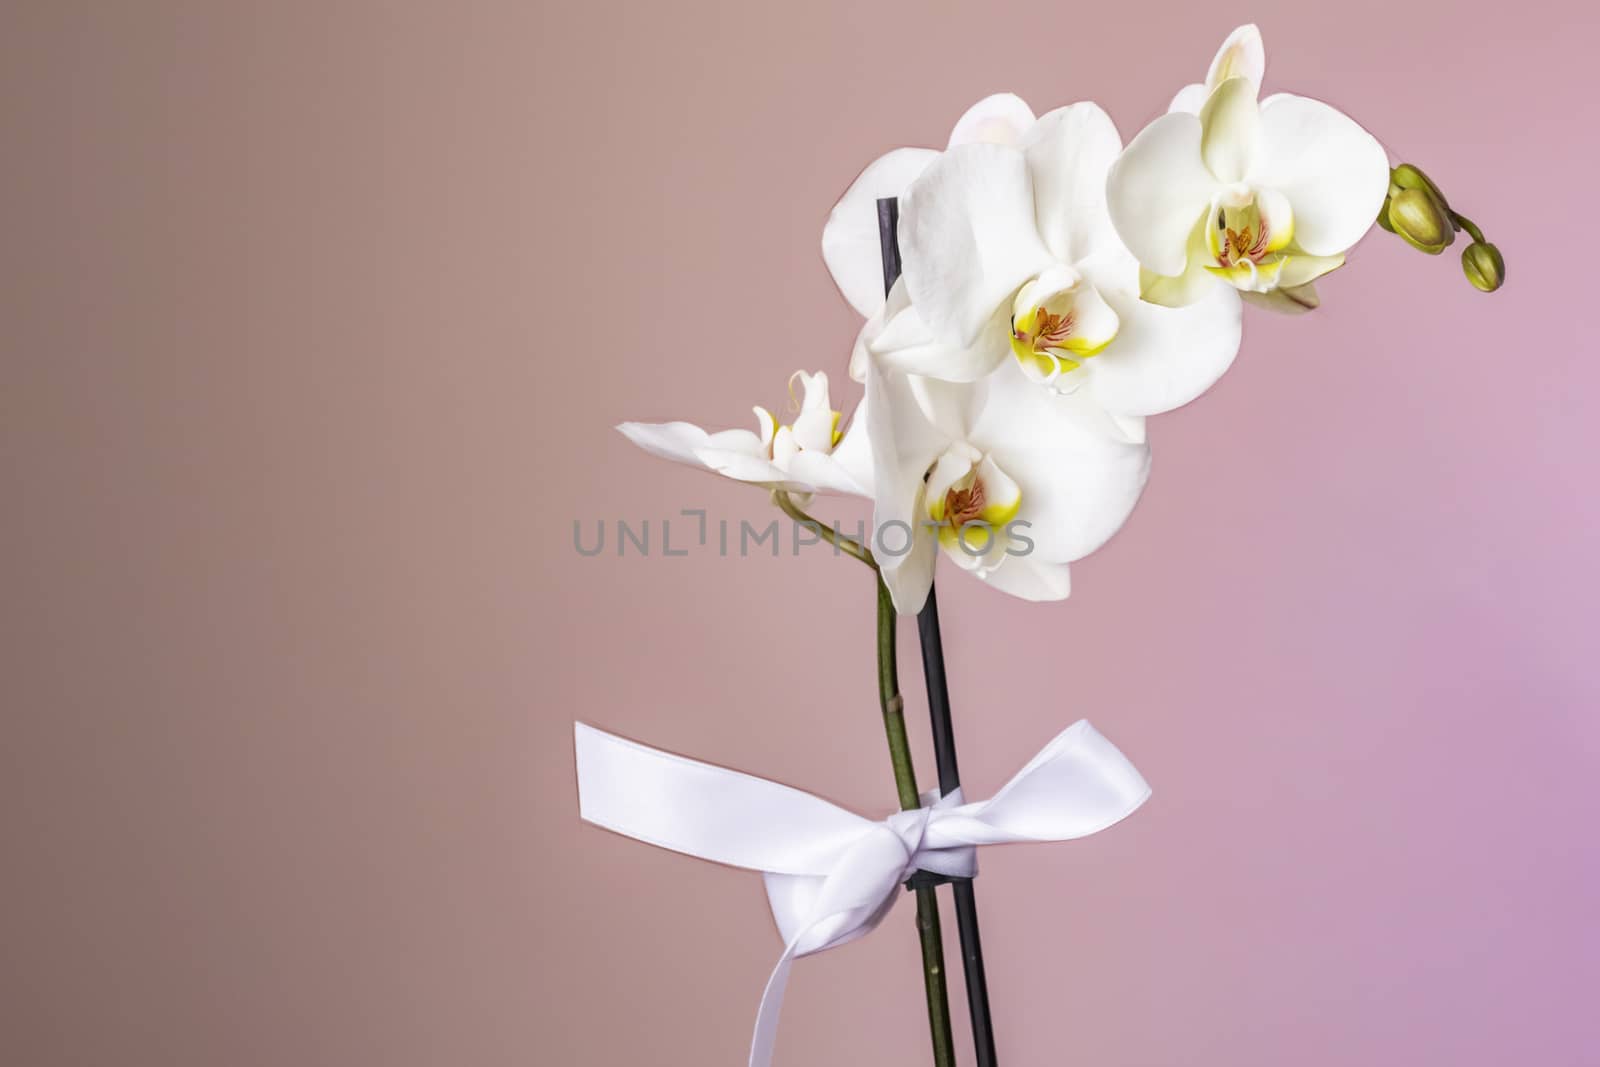 white orchid on a pink background